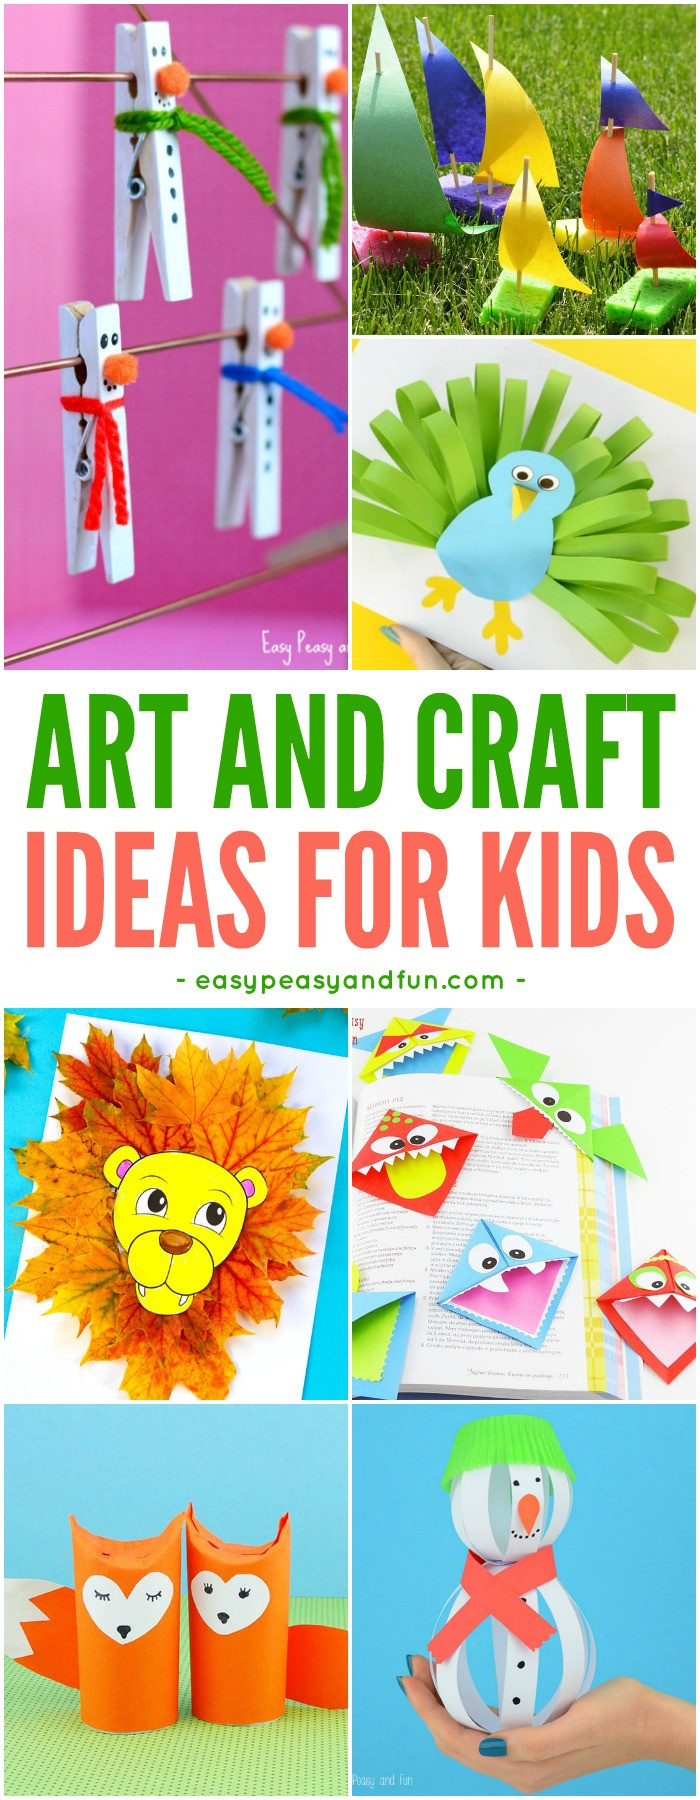 Fun Craft Ideas For Toddlers
 Crafts For Kids Tons of Art and Craft Ideas for Kids to